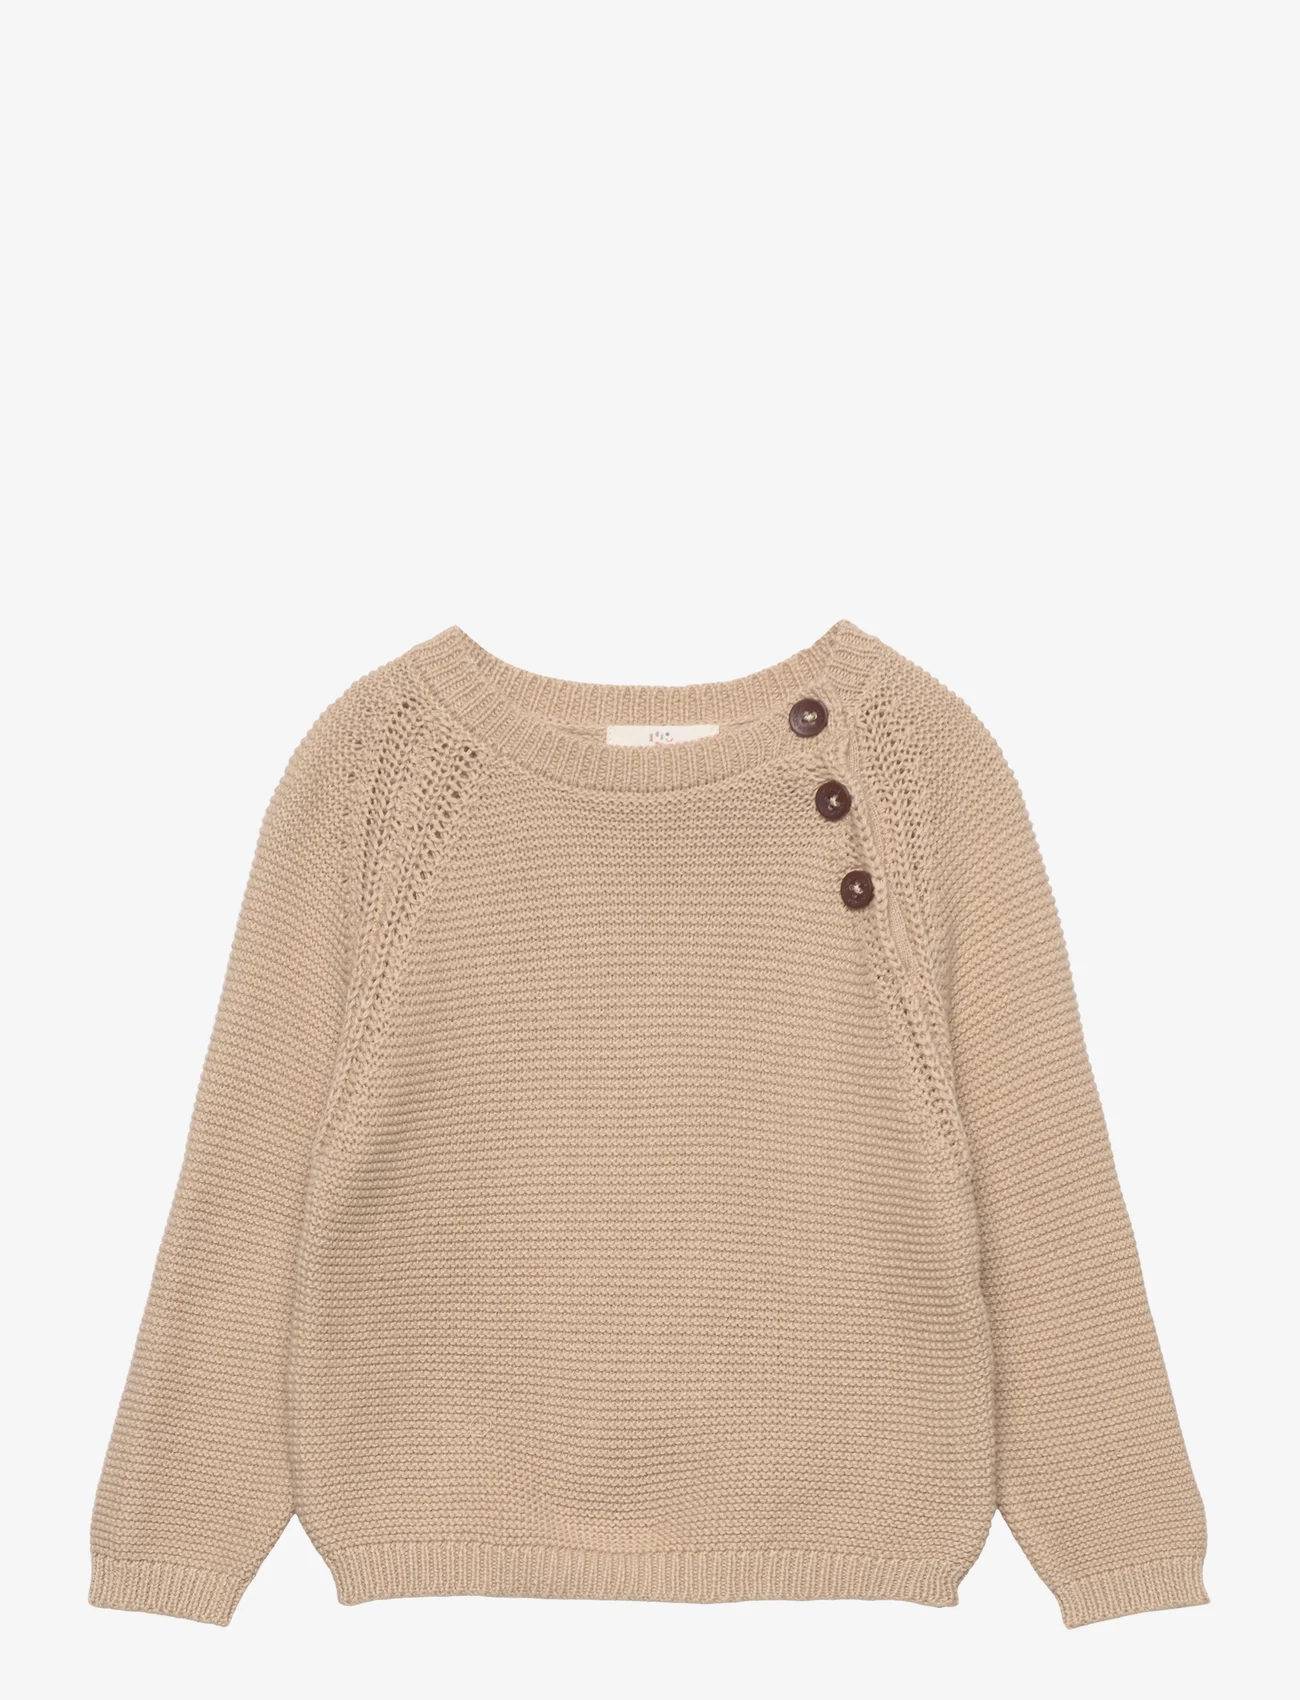 Copenhagen Colors - KNITTED PLAIN PULLOVER - pullover - lt taupe - 0